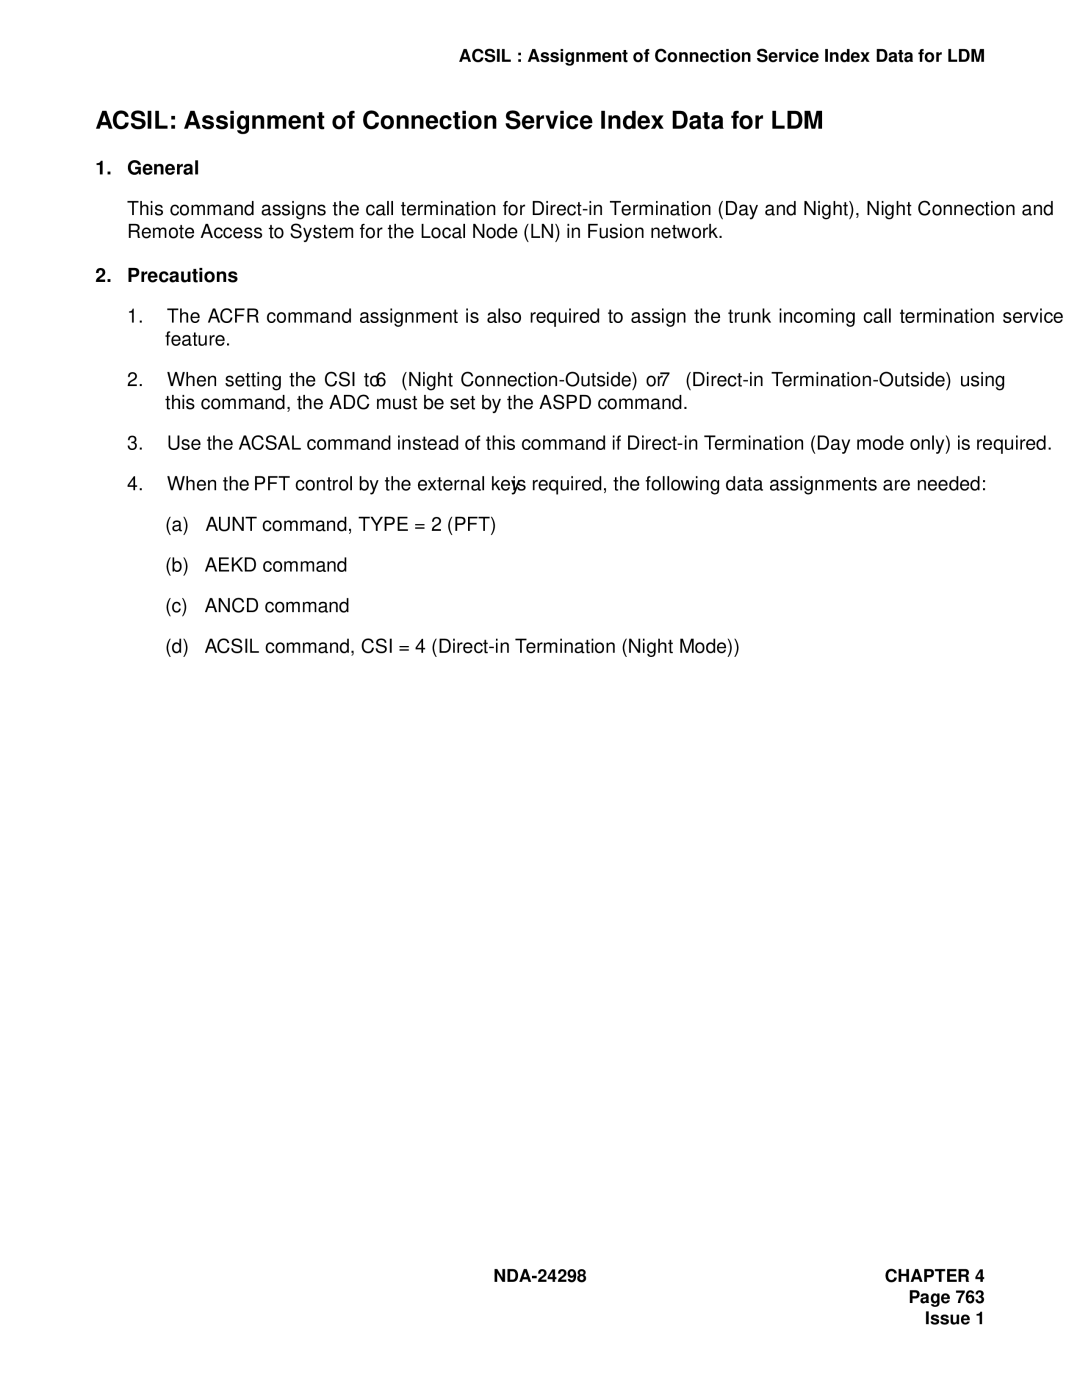 NEC NDA-24298 manual Acsil Assignment of Connection Service Index Data for LDM 